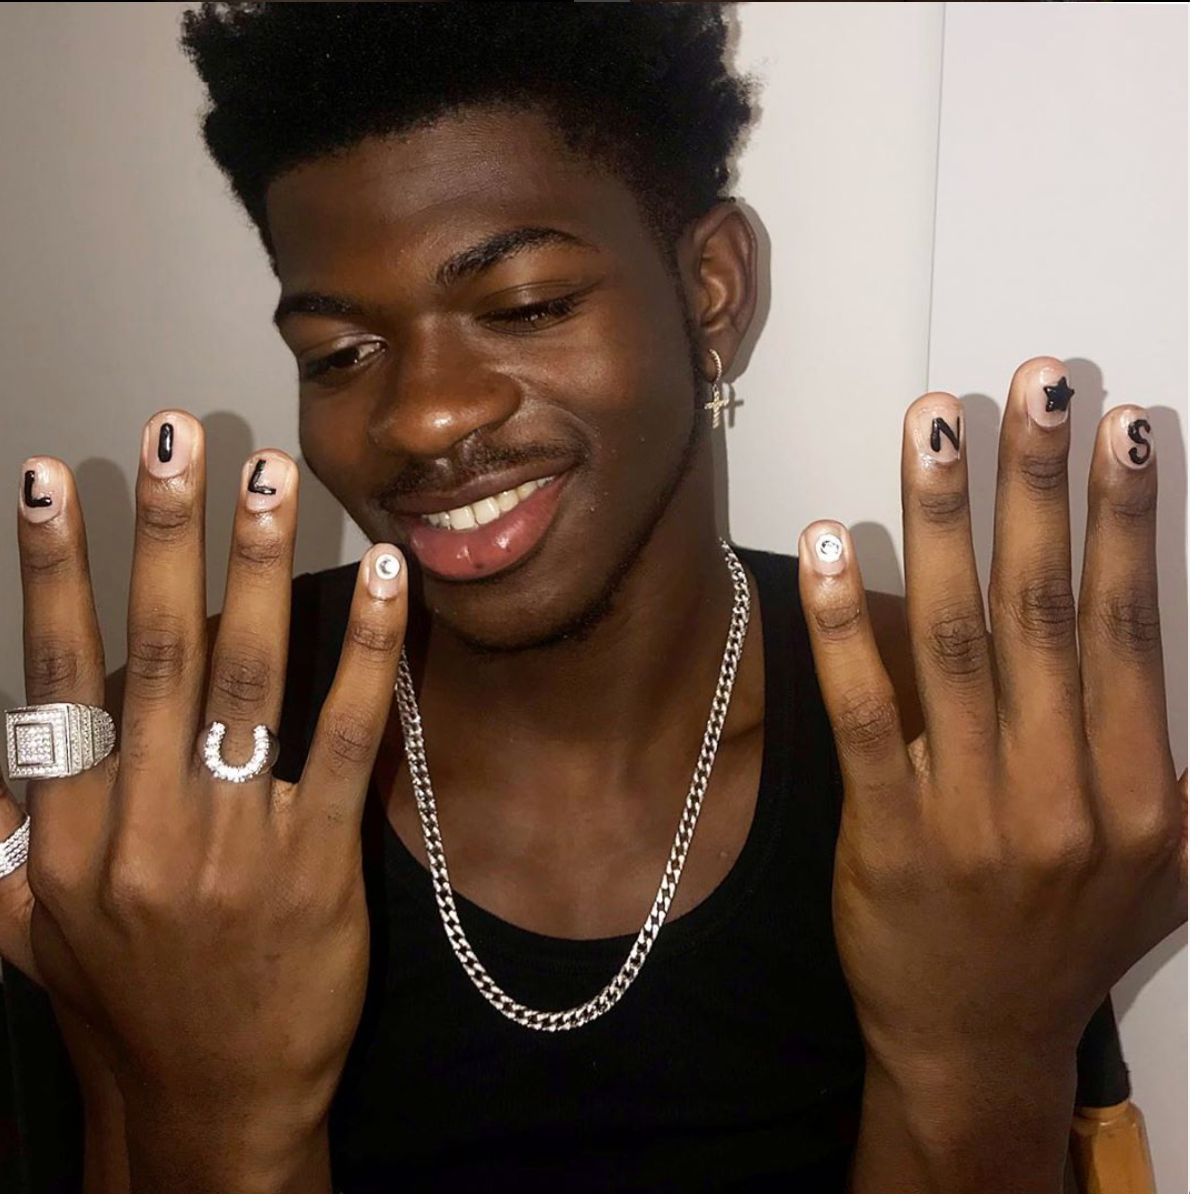 Check Out Trinidad James’ Lavish Nail Art And More Celebrity Men With Must-See Manicures